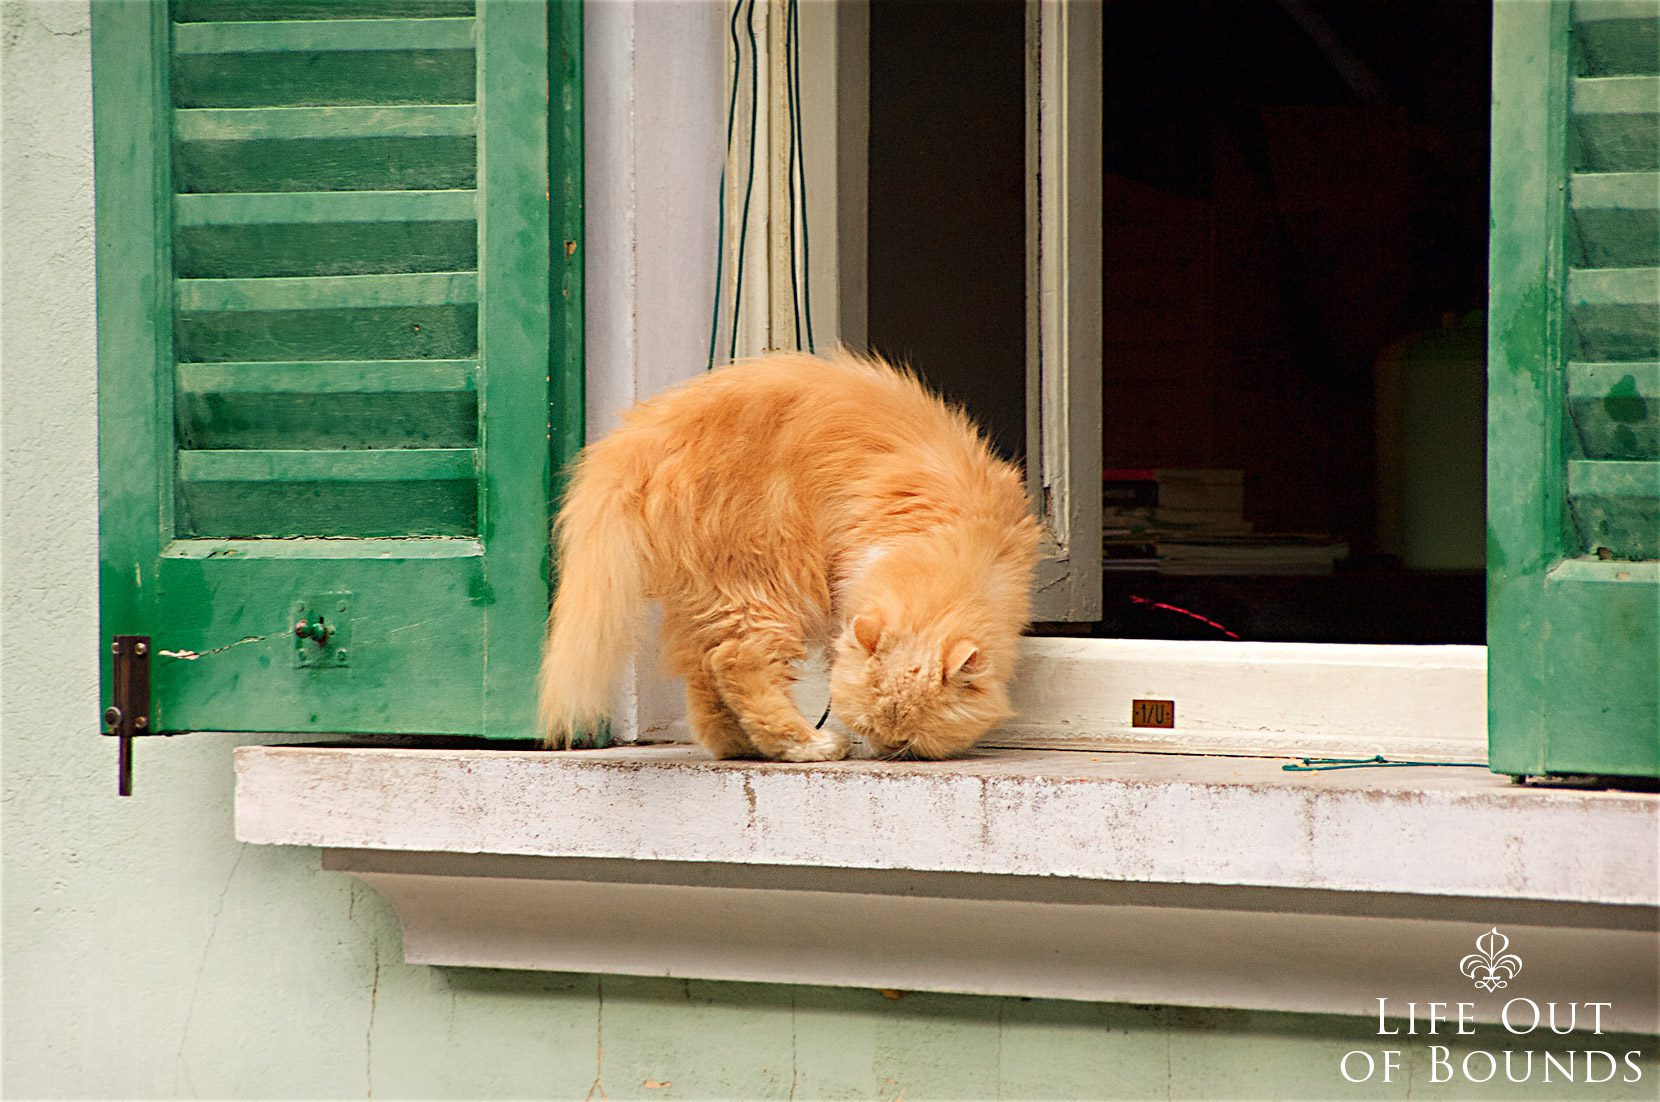 Ginger-cat-hanging-outside-the-window-sill-Sacro-Monte-di-Varese-Italy